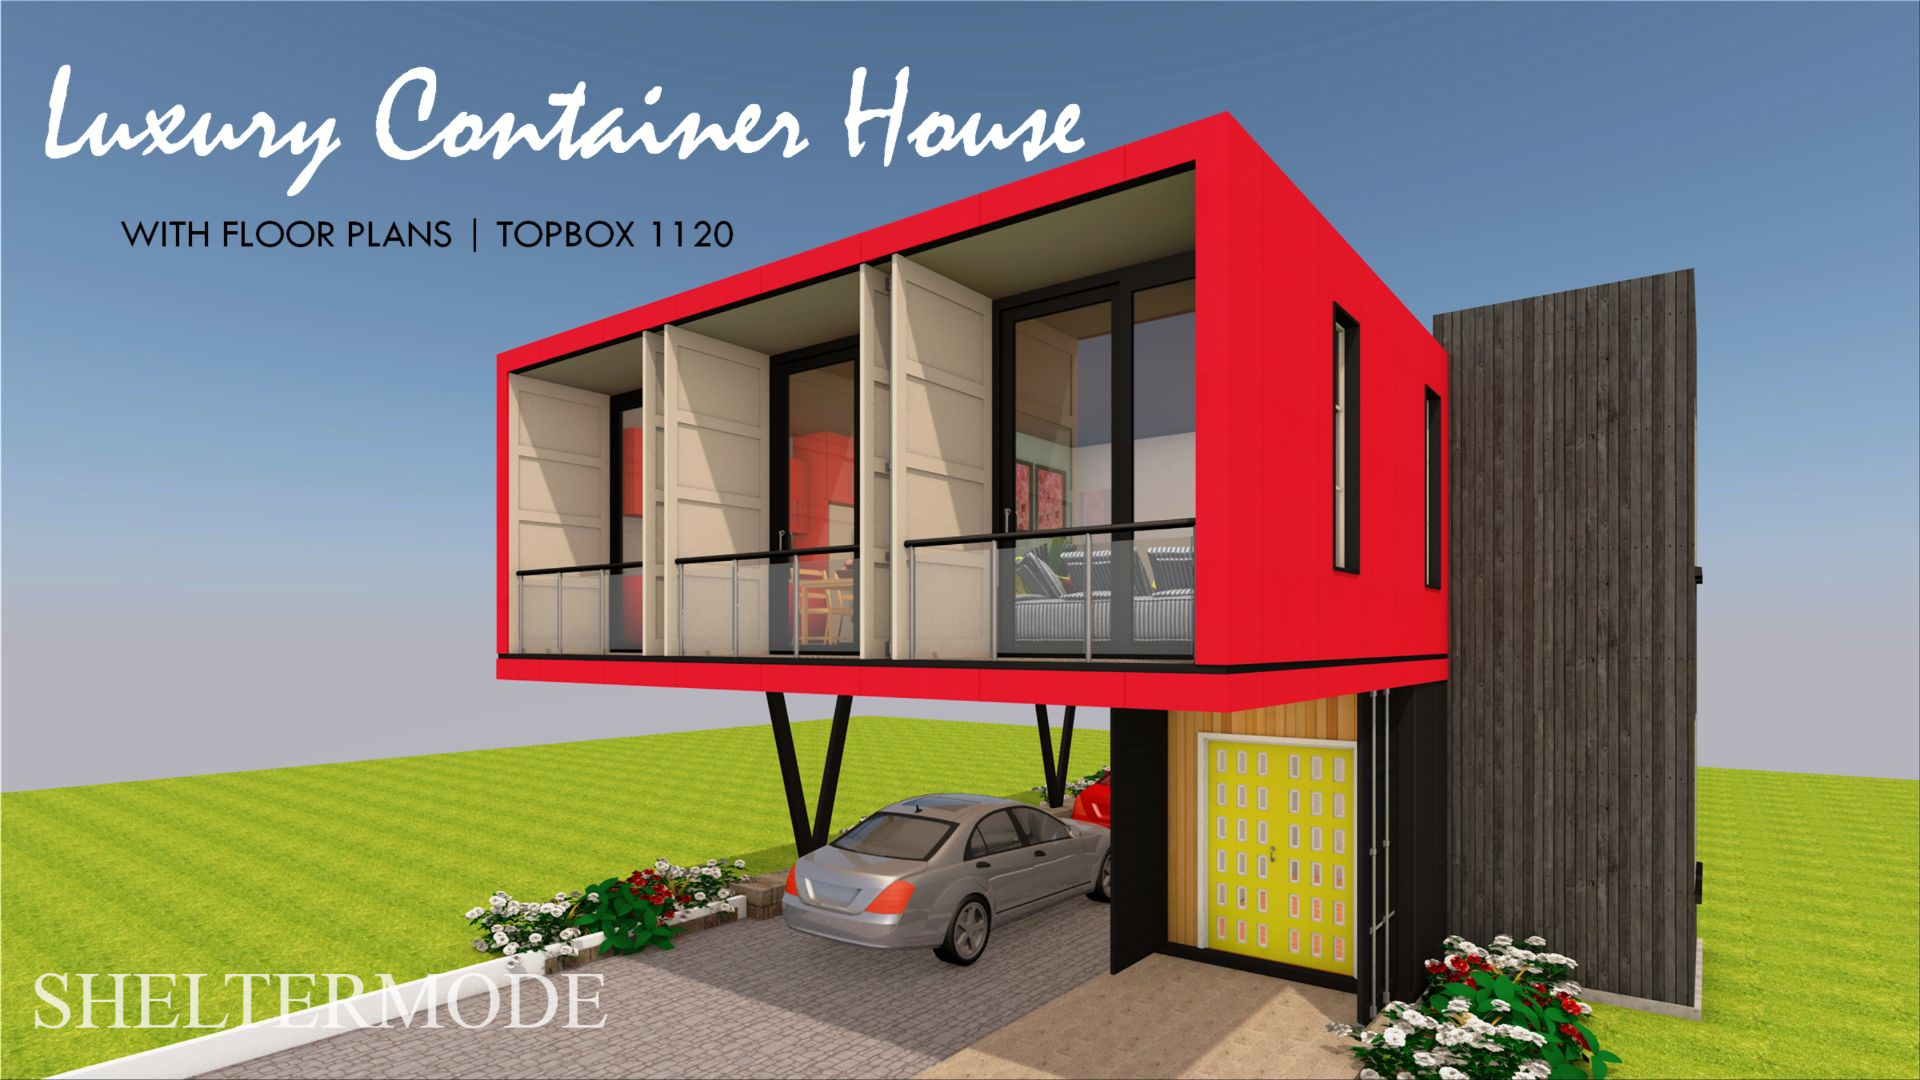 Shipping Container 3 Bedroom House Design with Floor Plans | TOPBOX 1120.